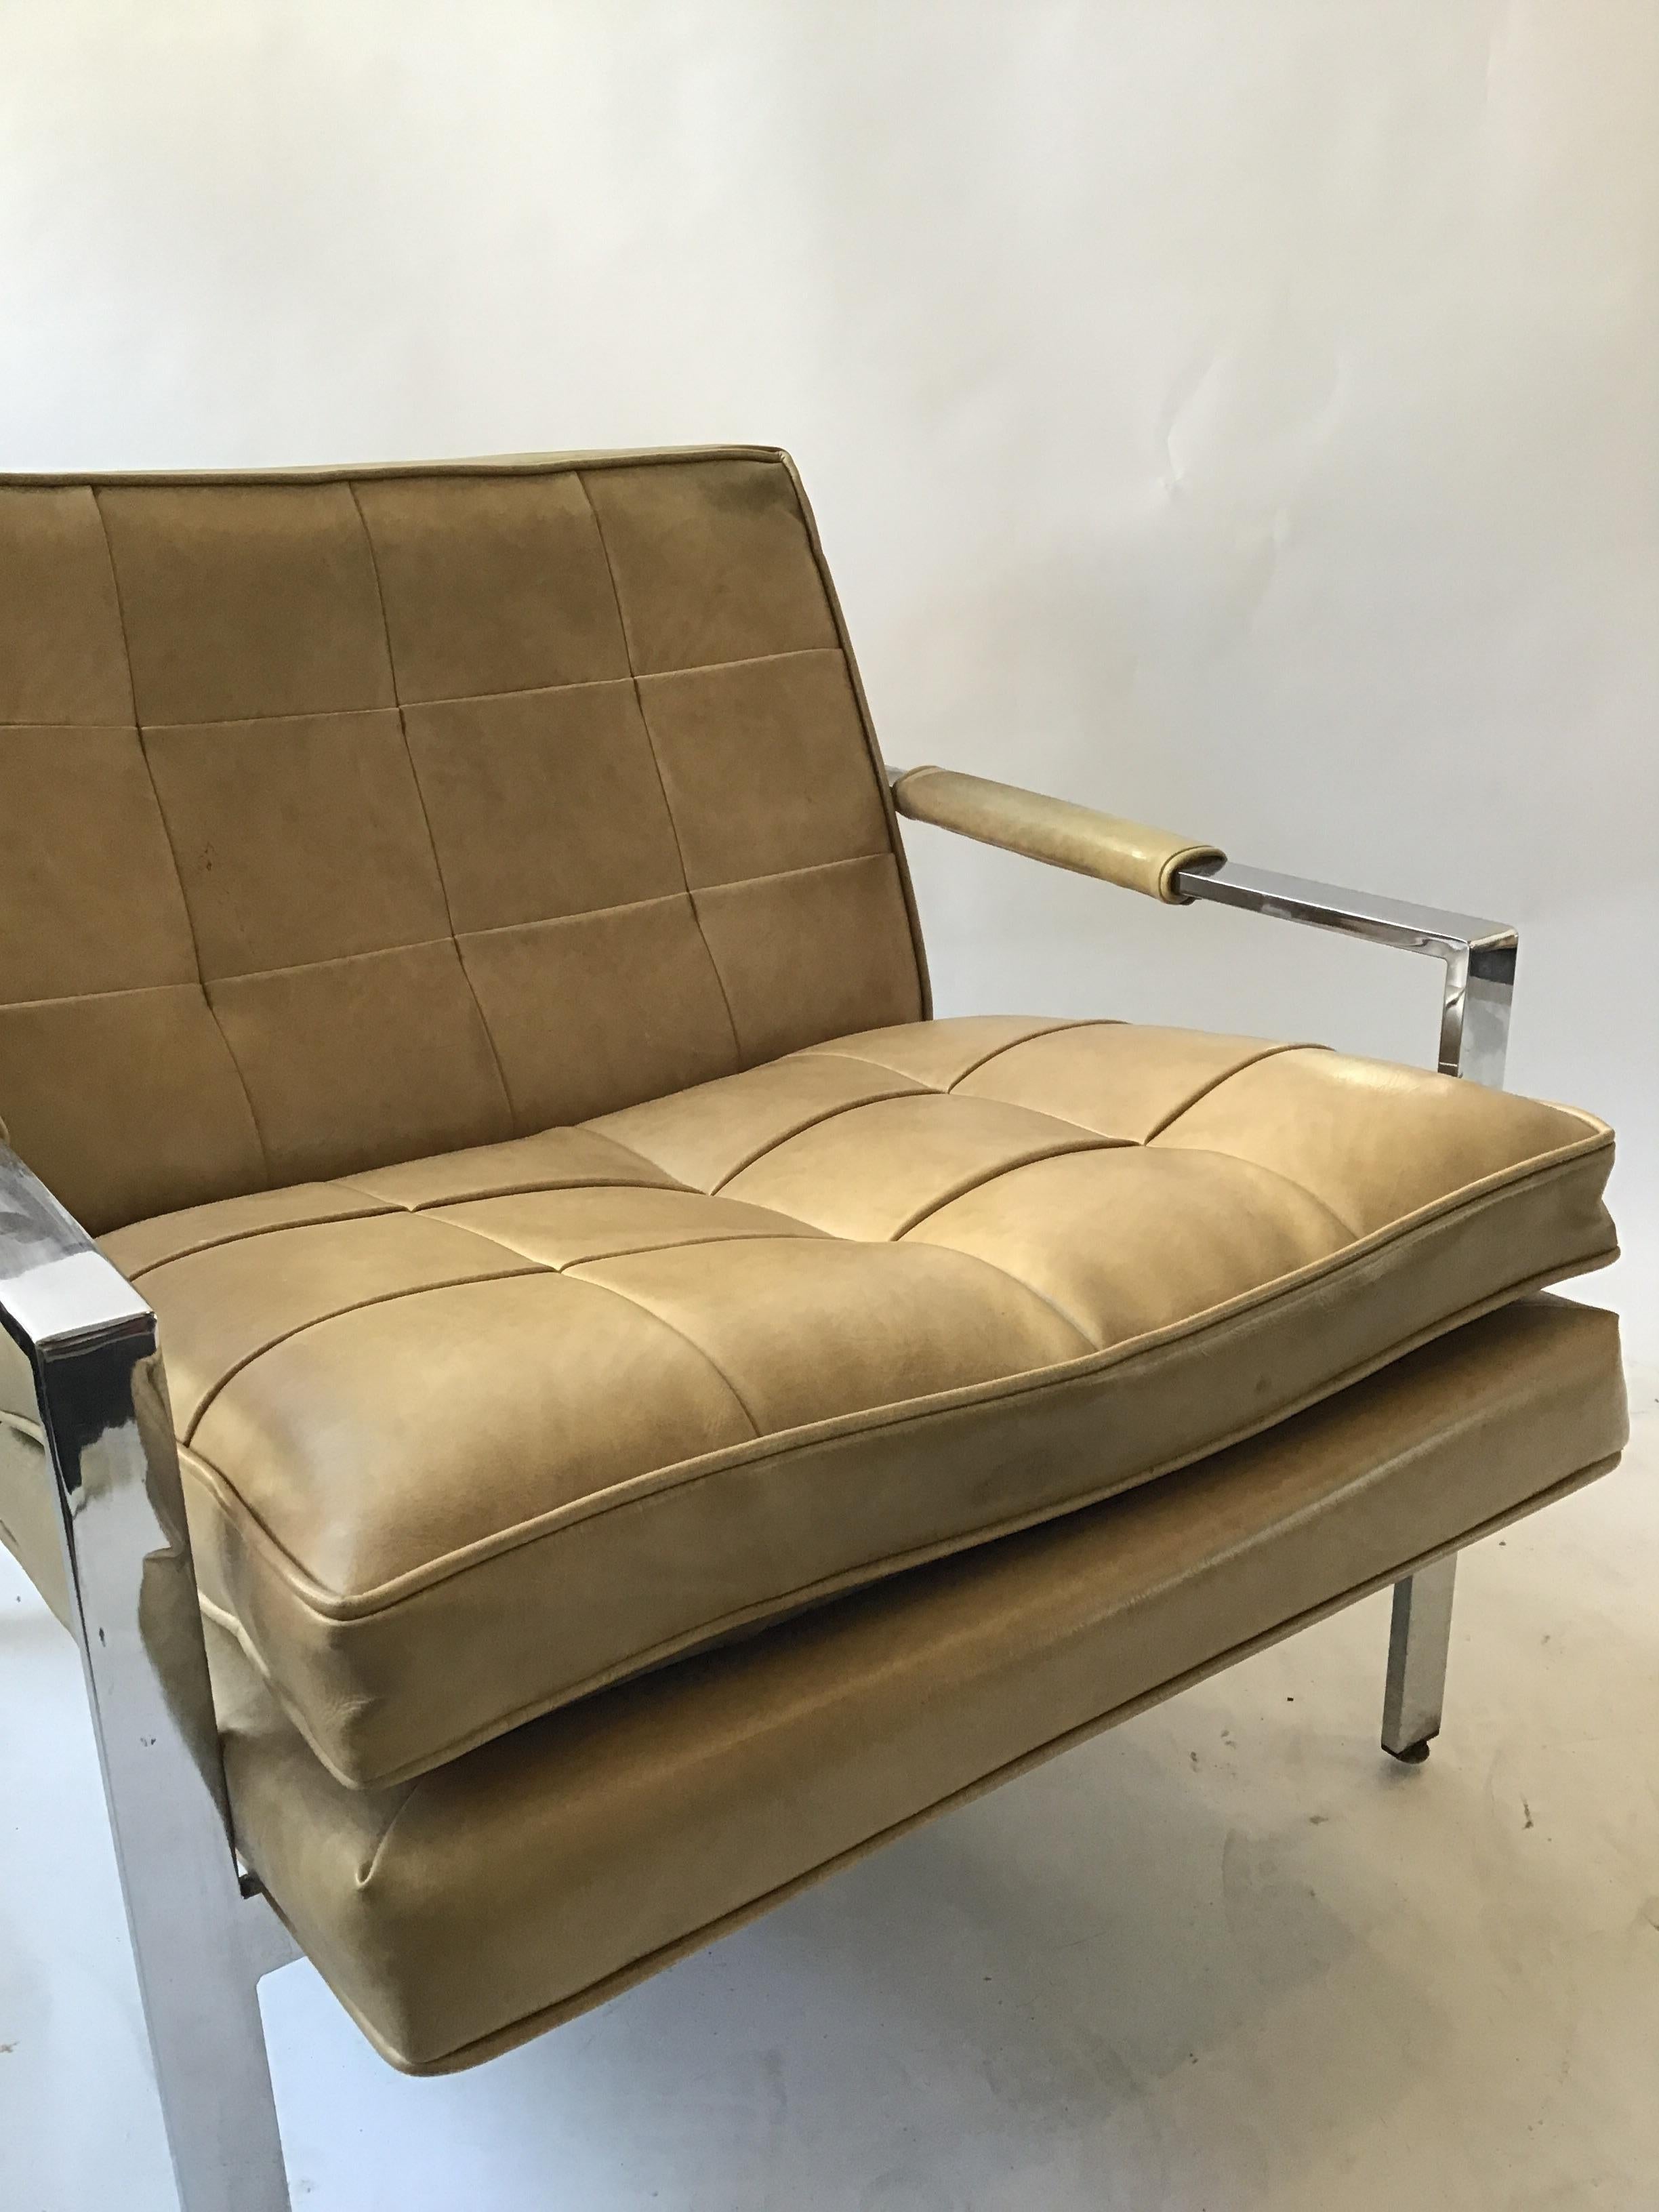 1970s chrome lounge chair. Frame has scratches. Needs to be reupholstered.